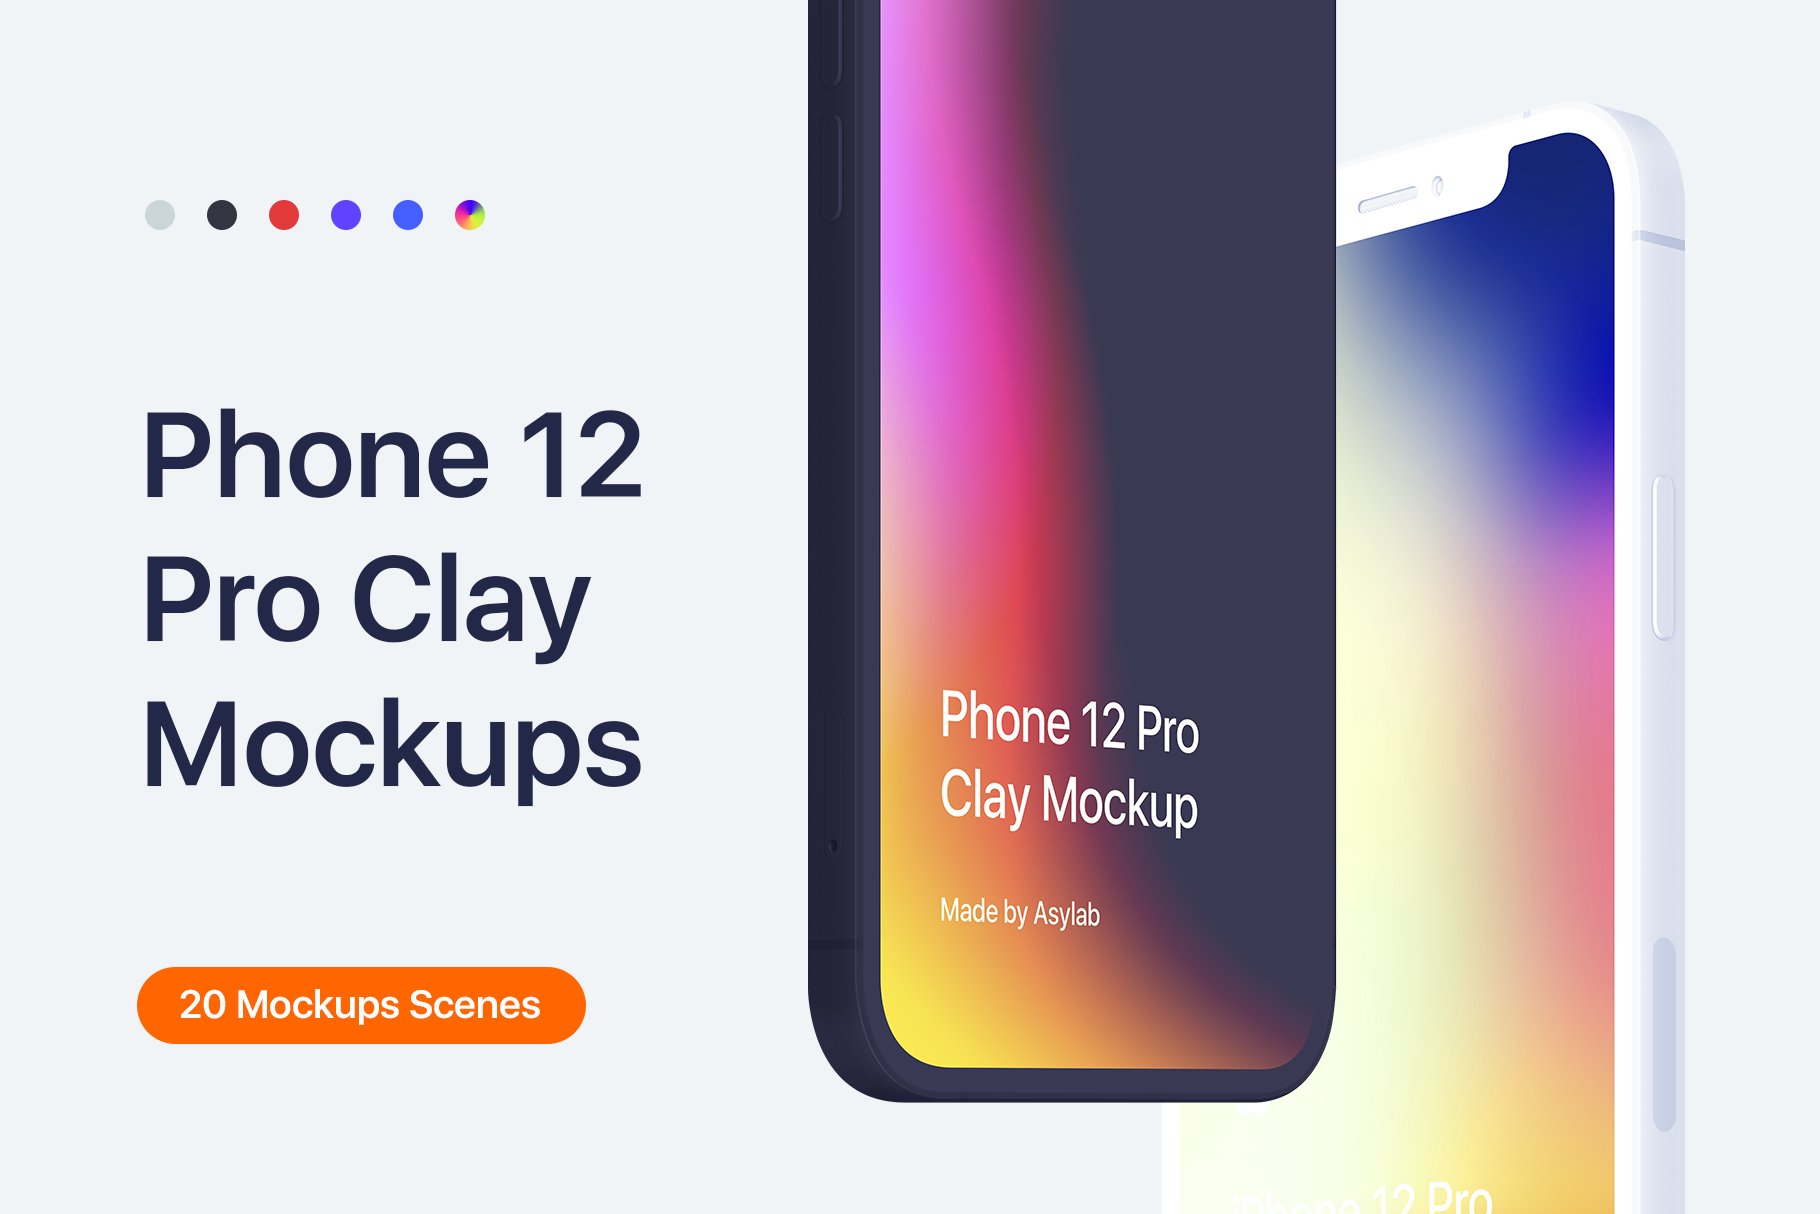 Phone 12 Pro - 20 Clay Mockups cover image.